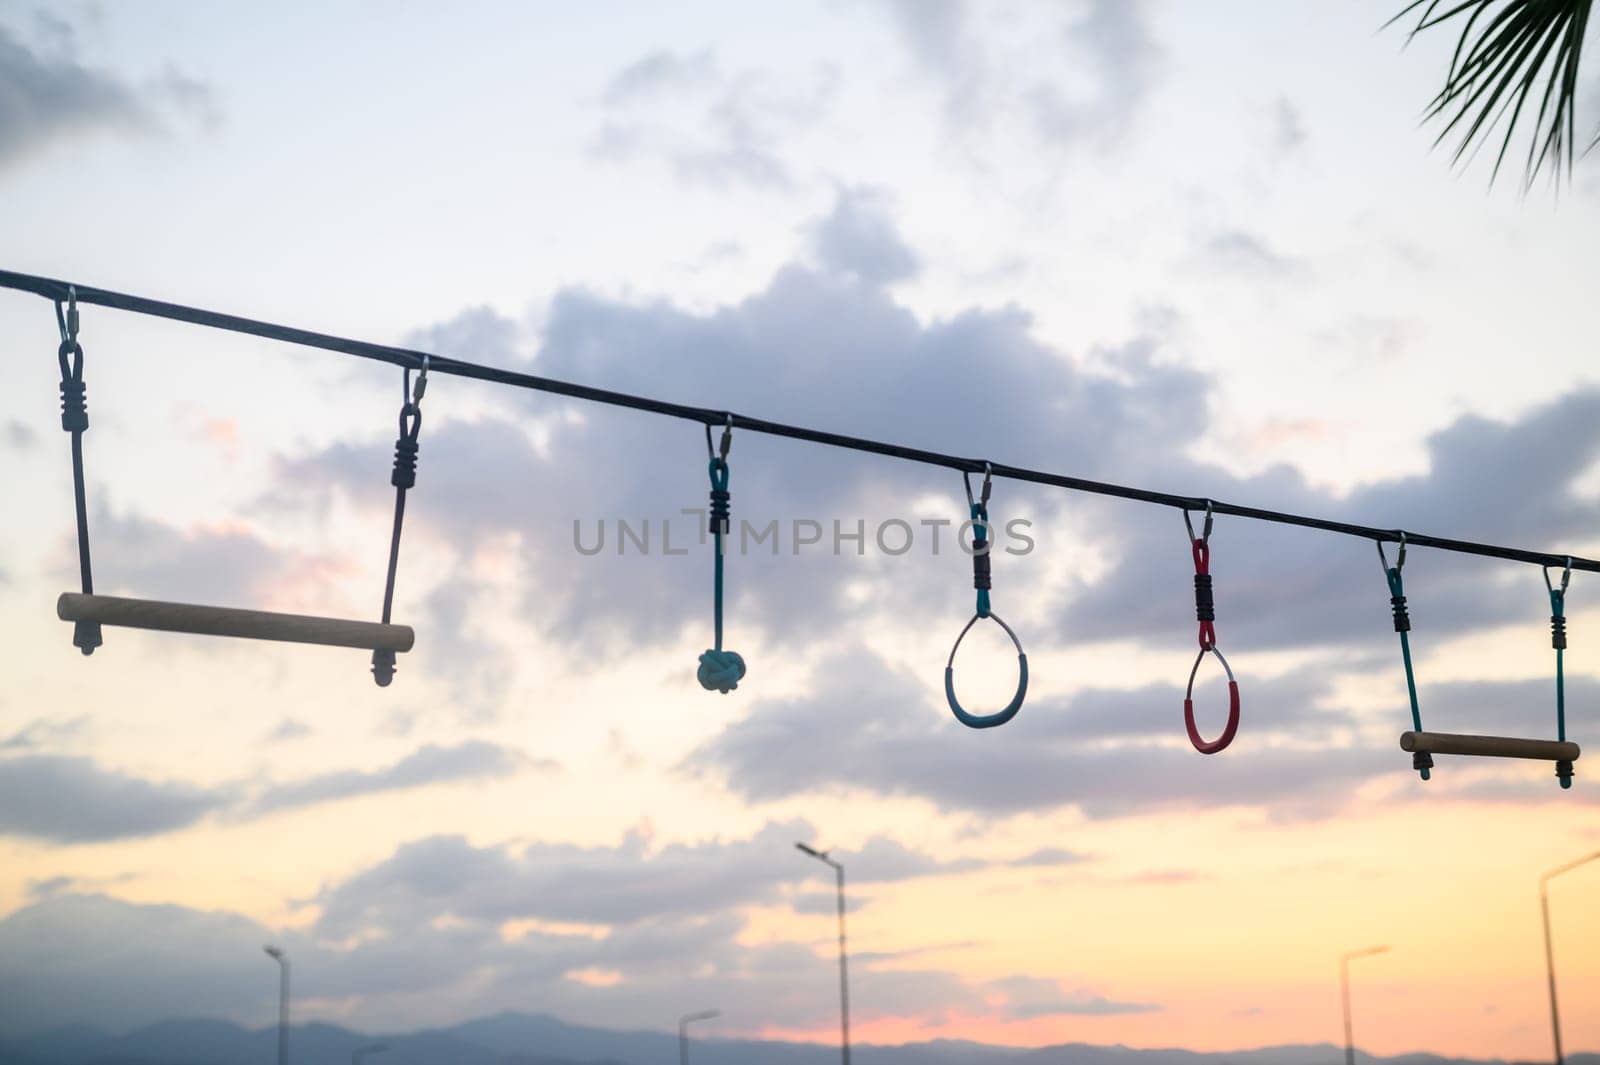 children's entertainment - rings, swings, stairs against the backdrop of sunset 1 by Mixa74